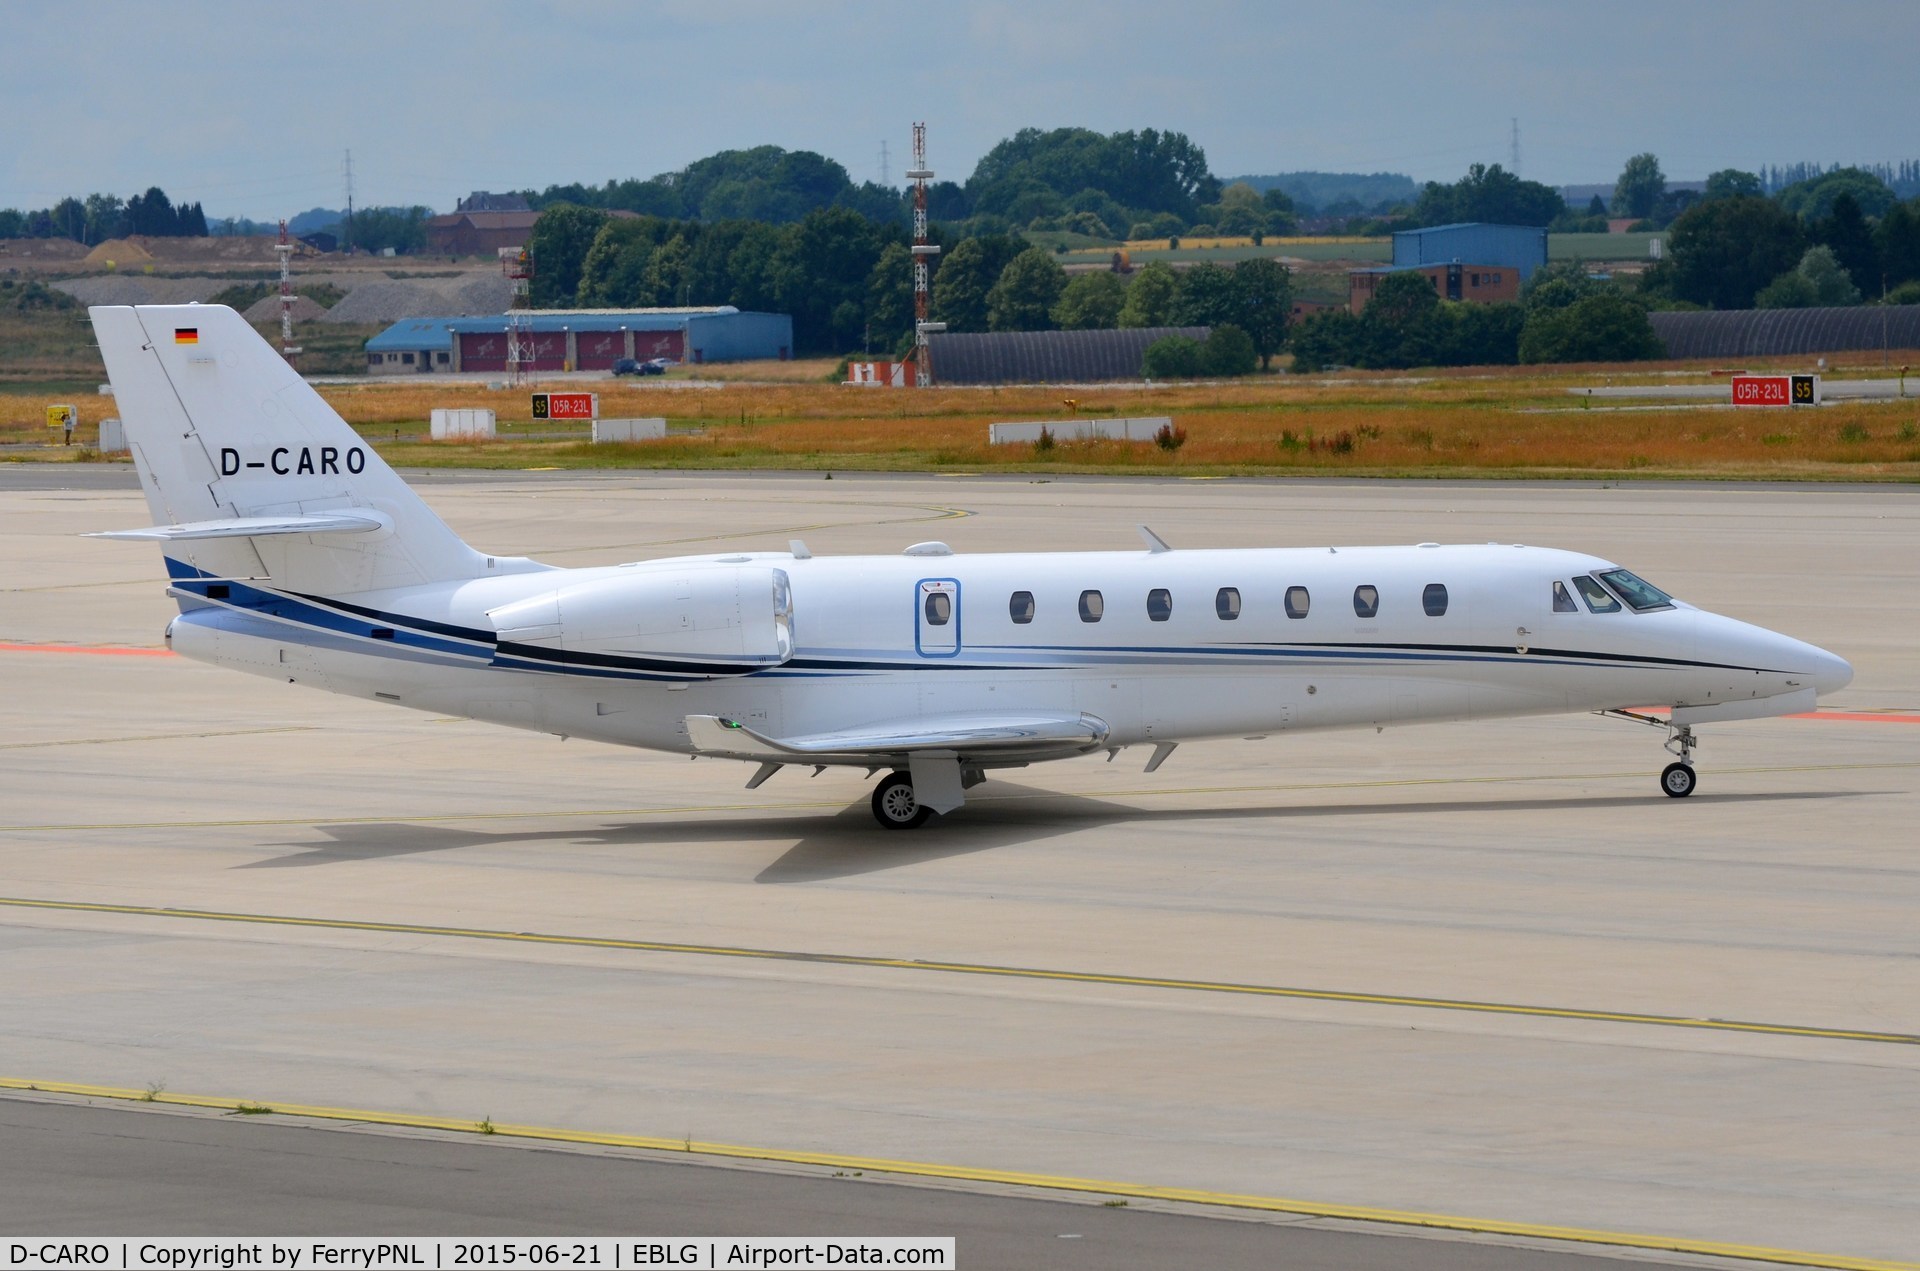 D-CARO, 2013 Cessna 680 Citation Sovereign C/N 680-0514, Ce680 taxying in